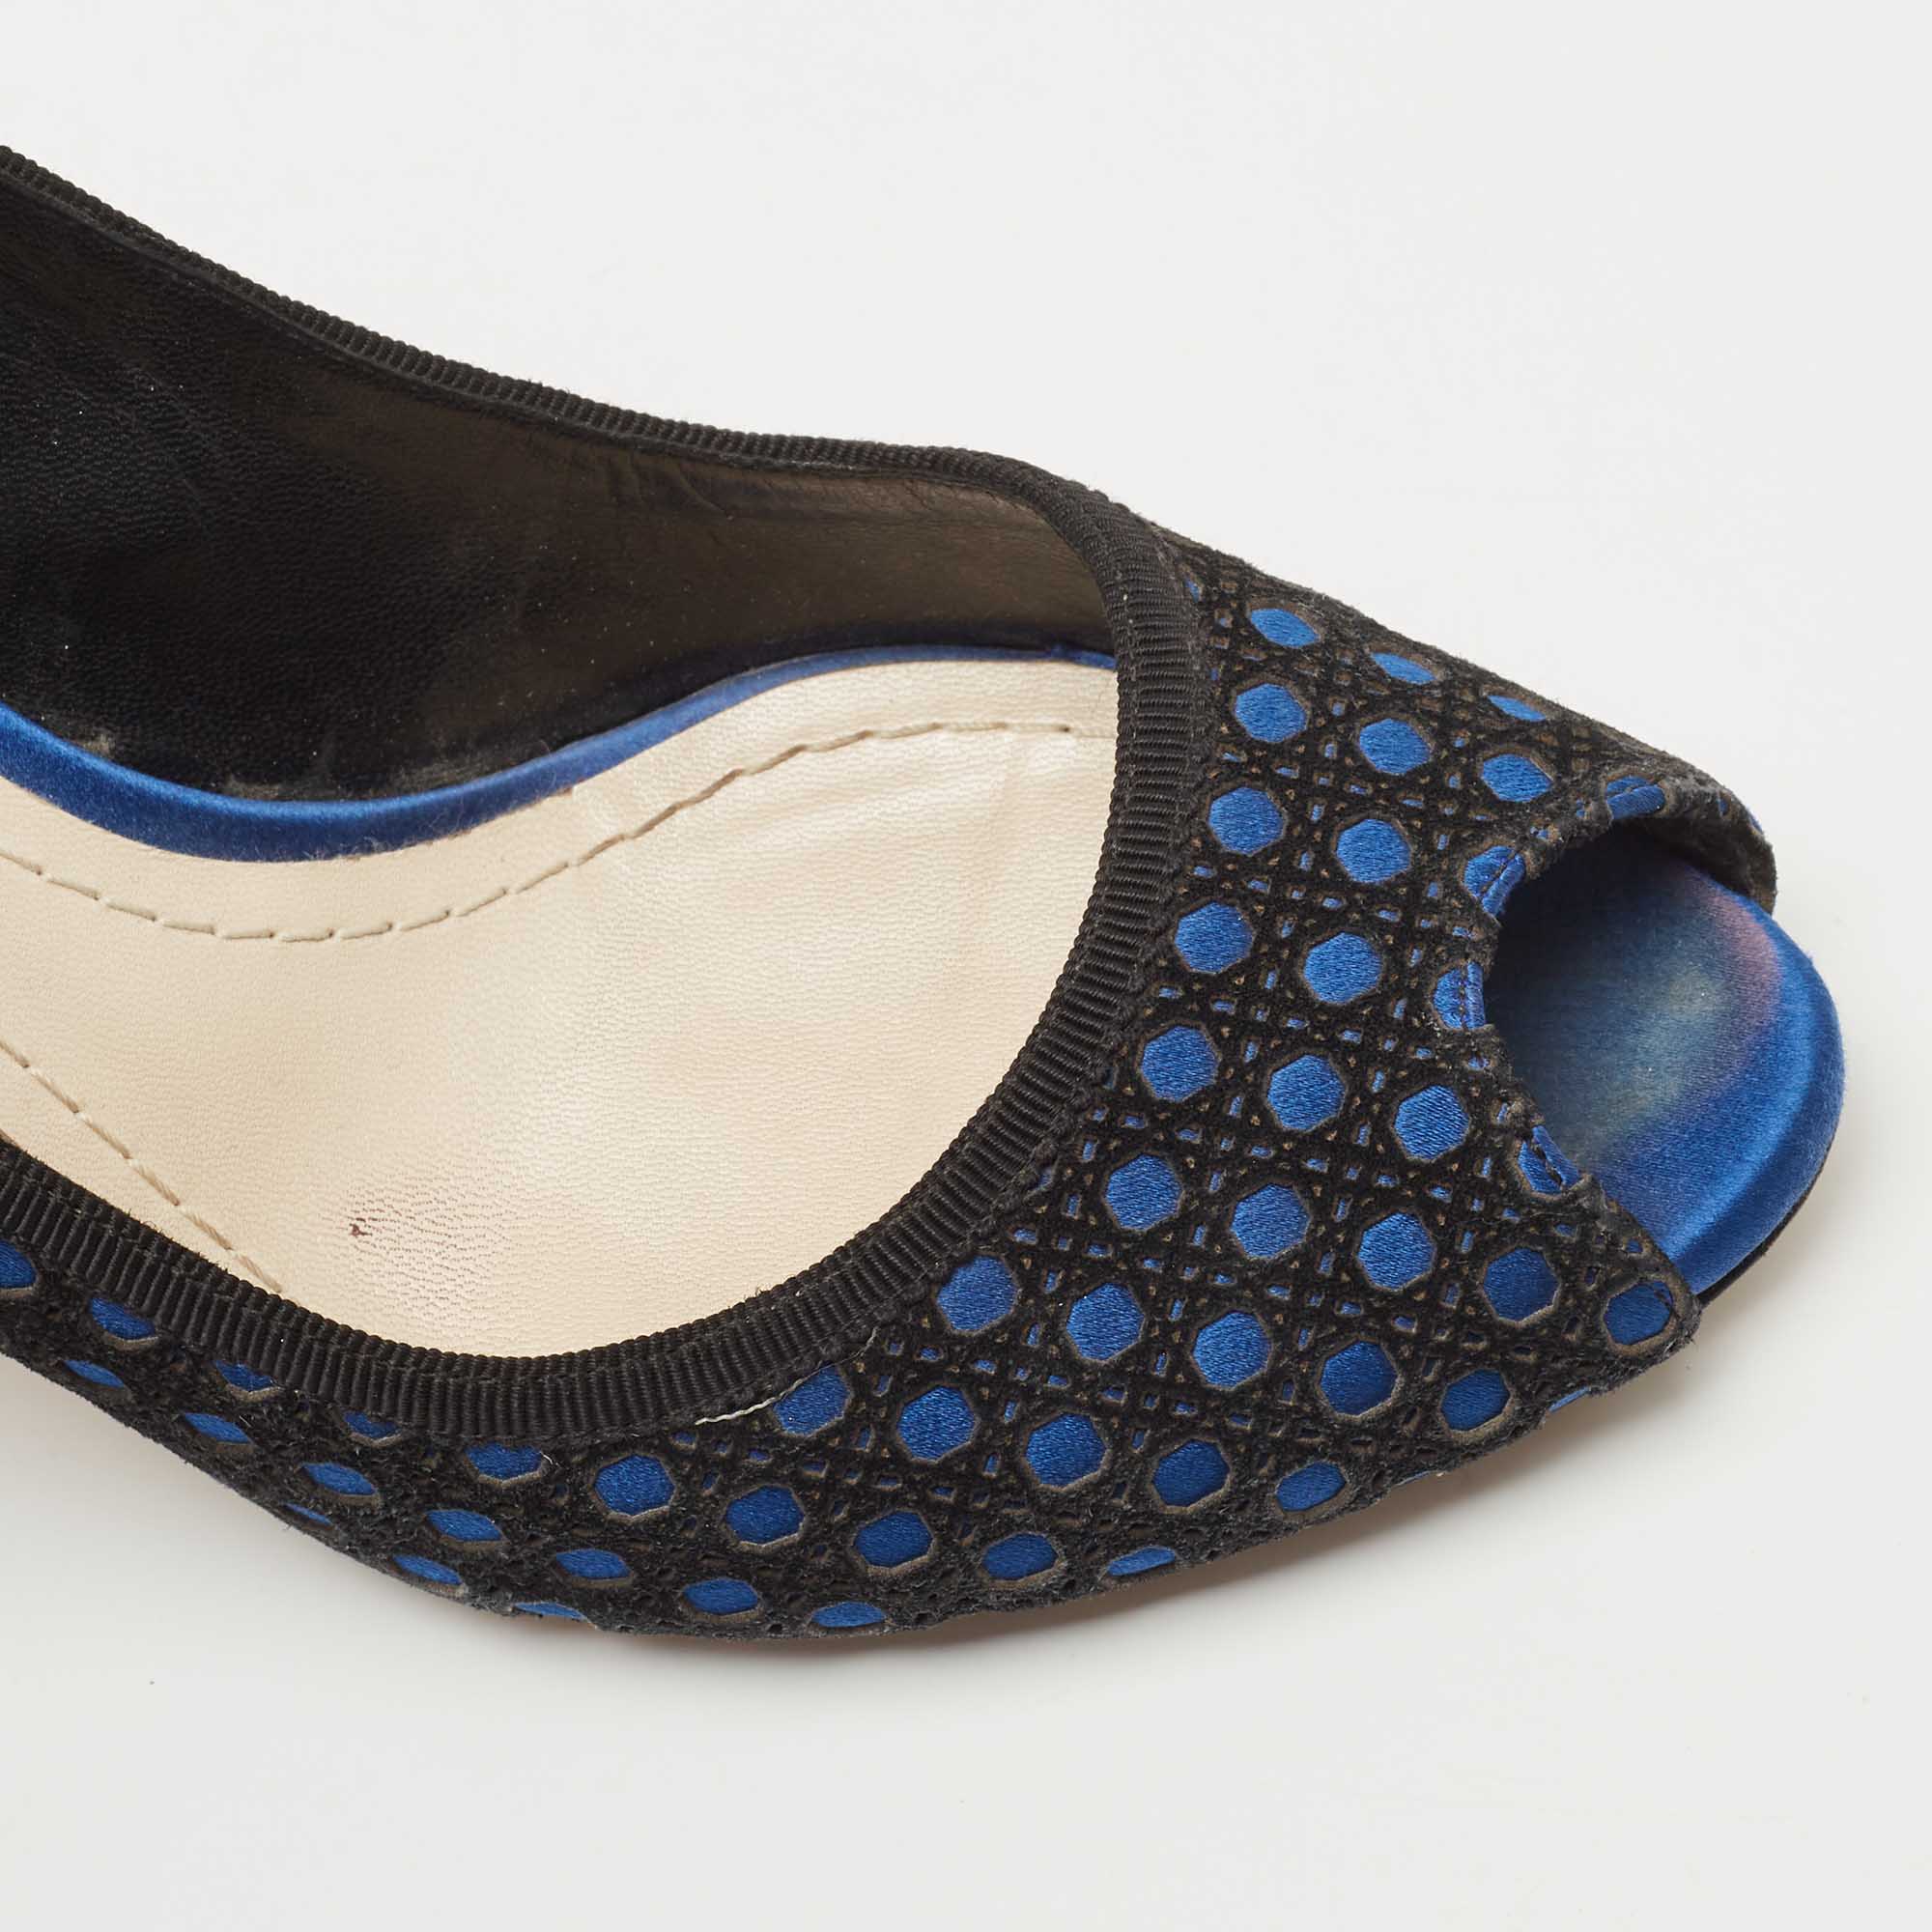 Dior Black/Blue Suede And Satin  Cannage Pumps Size 40